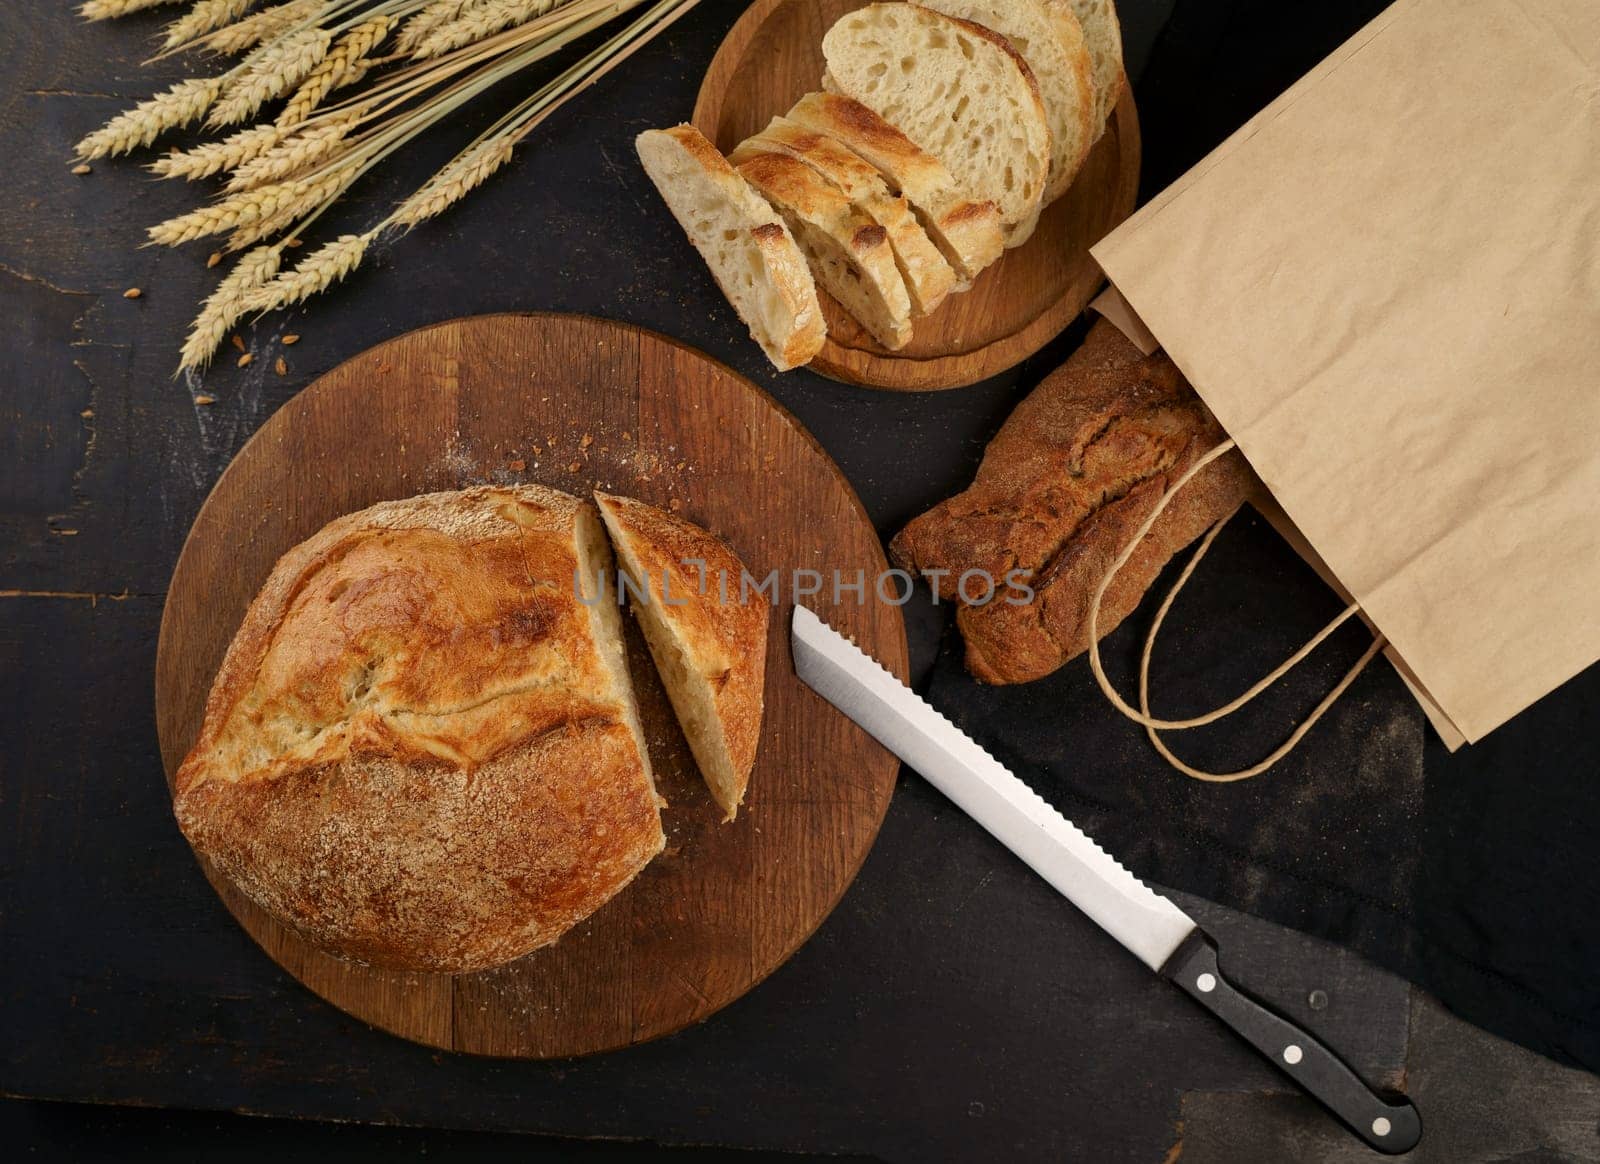 The healthy eating and traditional bakery concept. Top viev. Fresh bread on table close-up. Fresh bread on the kitchen table. hopped grain bread put on kitchen wood plate with a knife ready for cut.